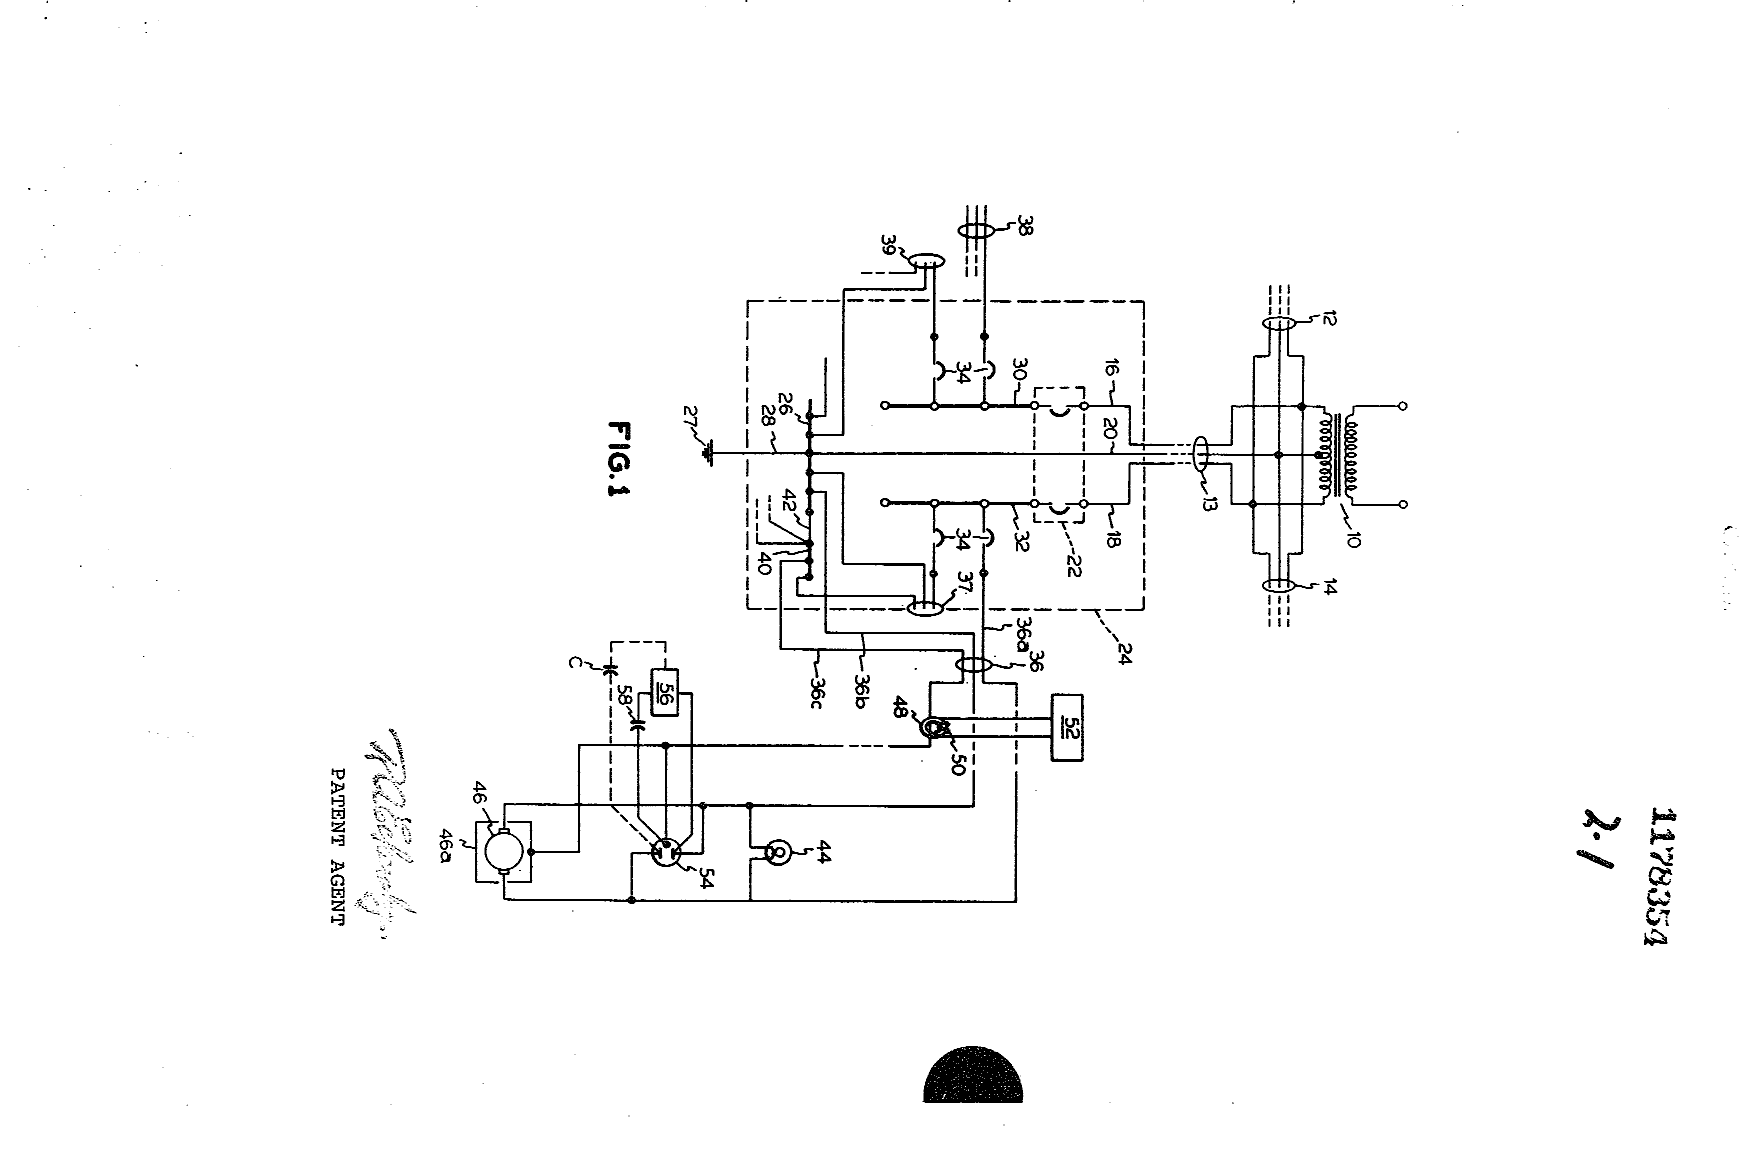 Canadian Patent Document 1178354. Drawings 19931217. Image 1 of 2